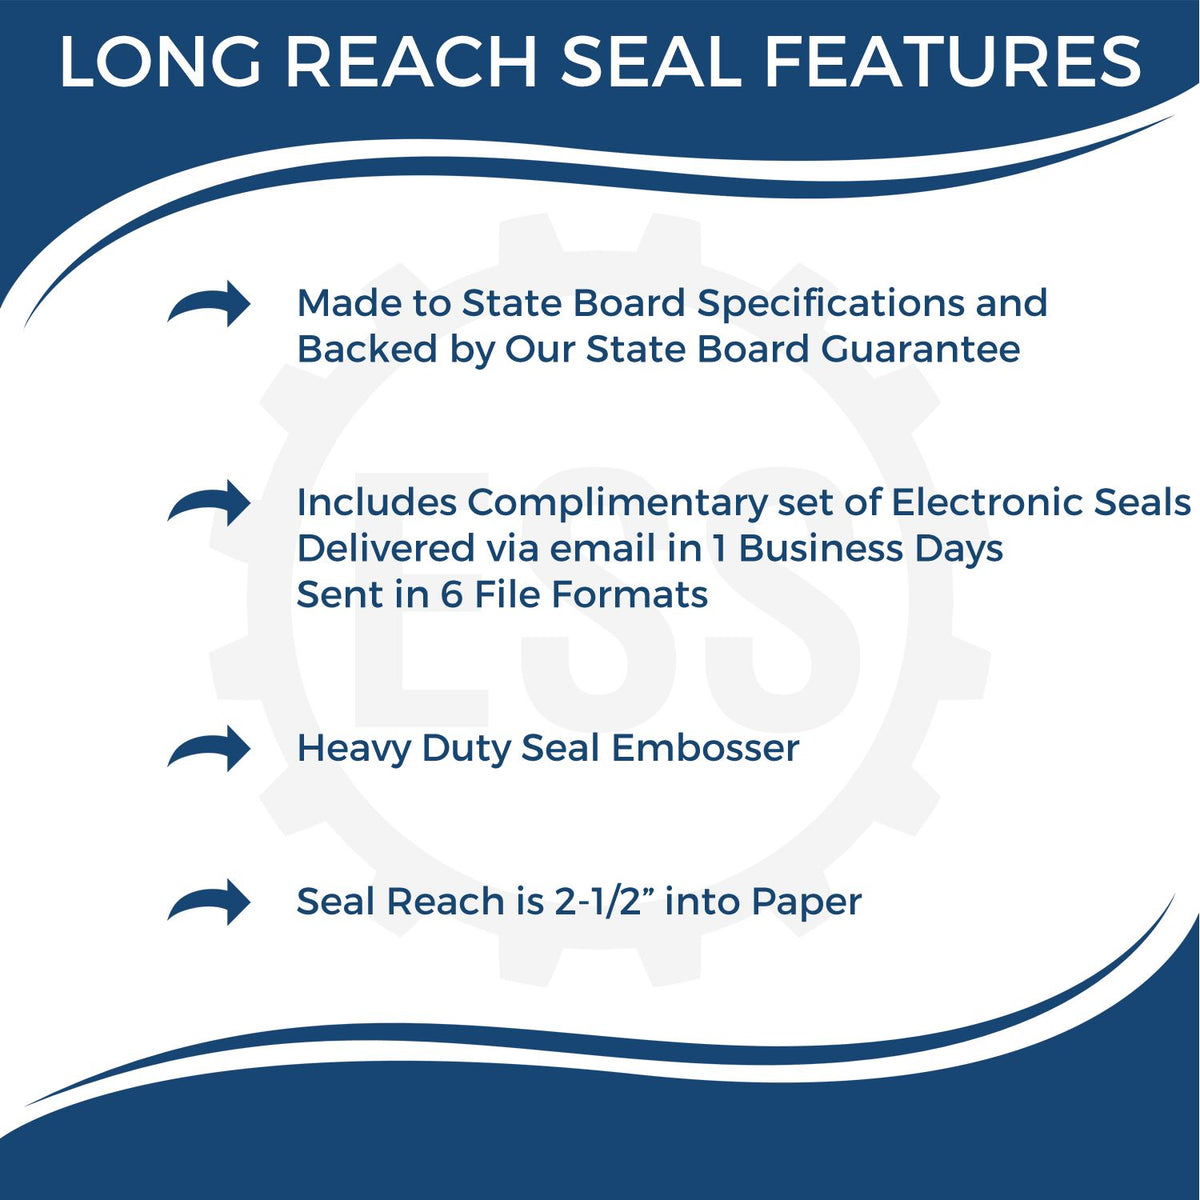 A picture of an infographic highlighting the selling points for the Long Reach Arkansas Land Surveyor Seal